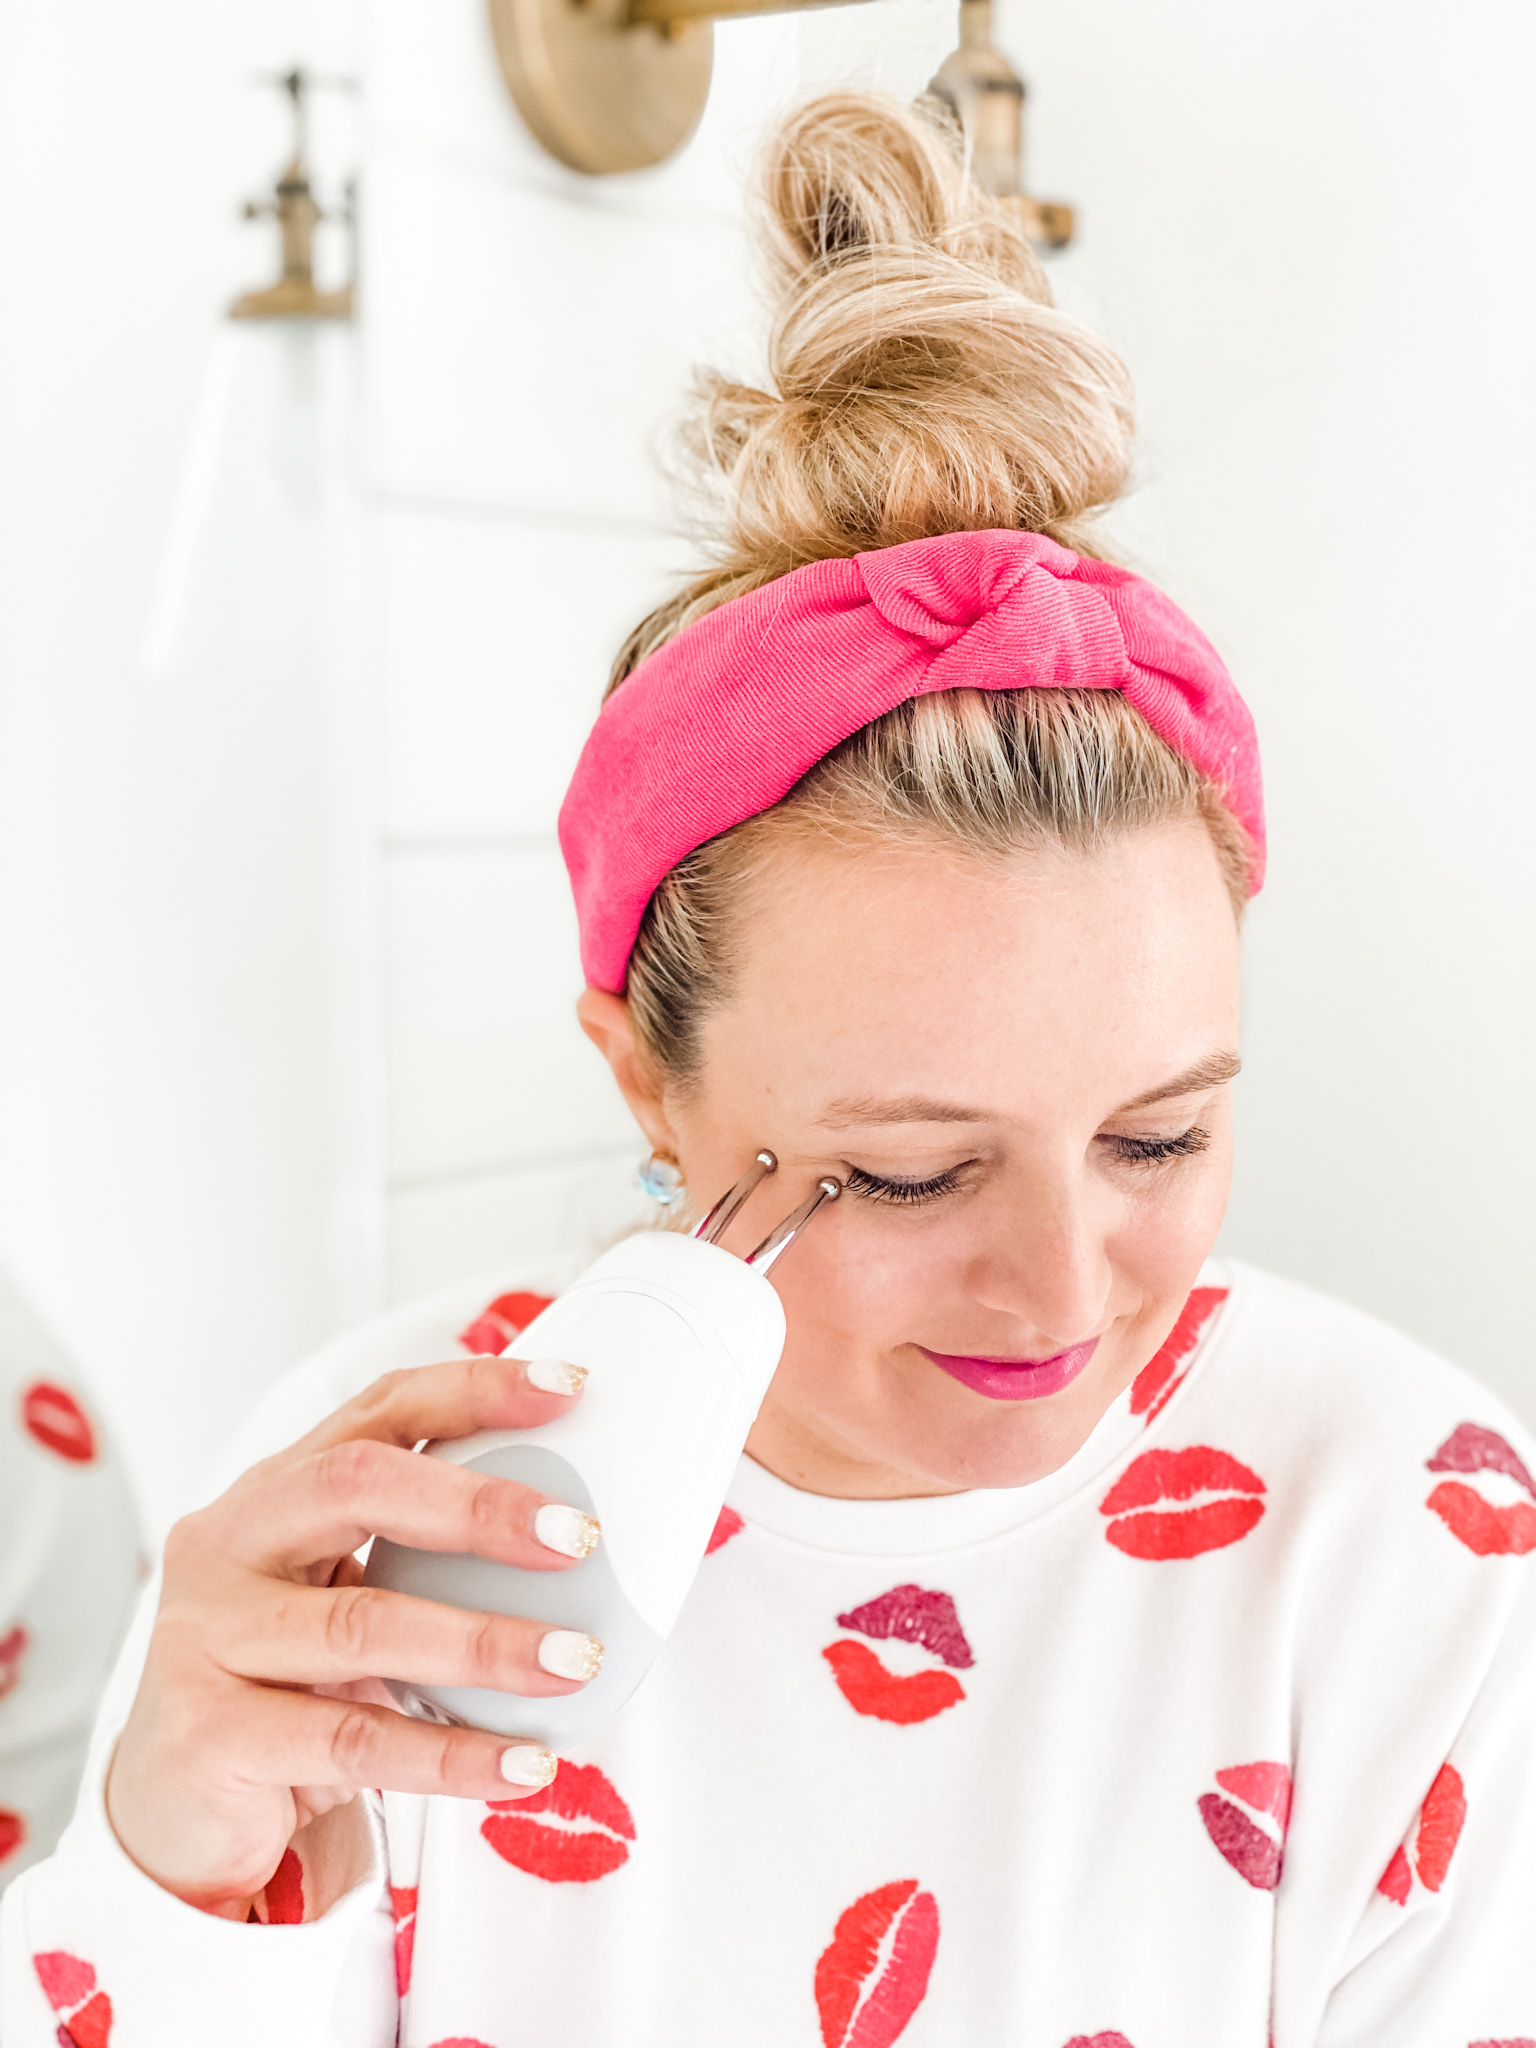 NuFace Trinity by popular Houston beauty blog, Fancy Ashley: image of a woman wearing a lip print pajama set and siting on her bathroom counter while using the NuFace Trinity facial toner. 